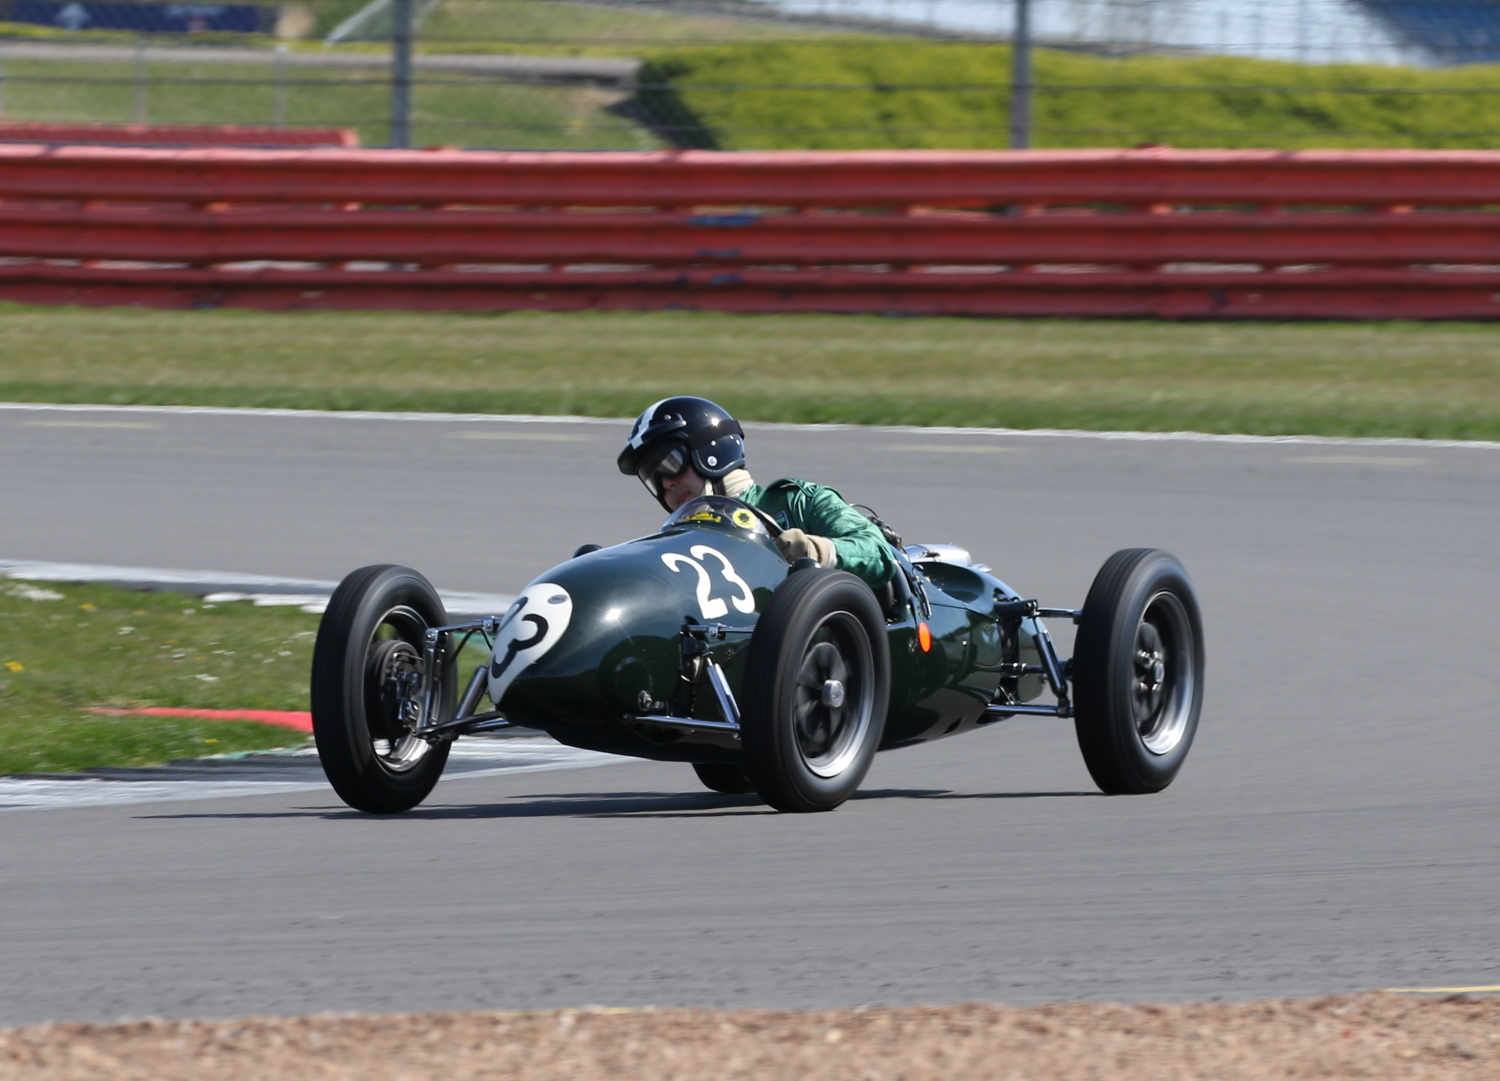 GOERGE SHACKLETON TOOK A STRONG WIN IN HIS 1957 COOPER MKXI.JPG Picasa